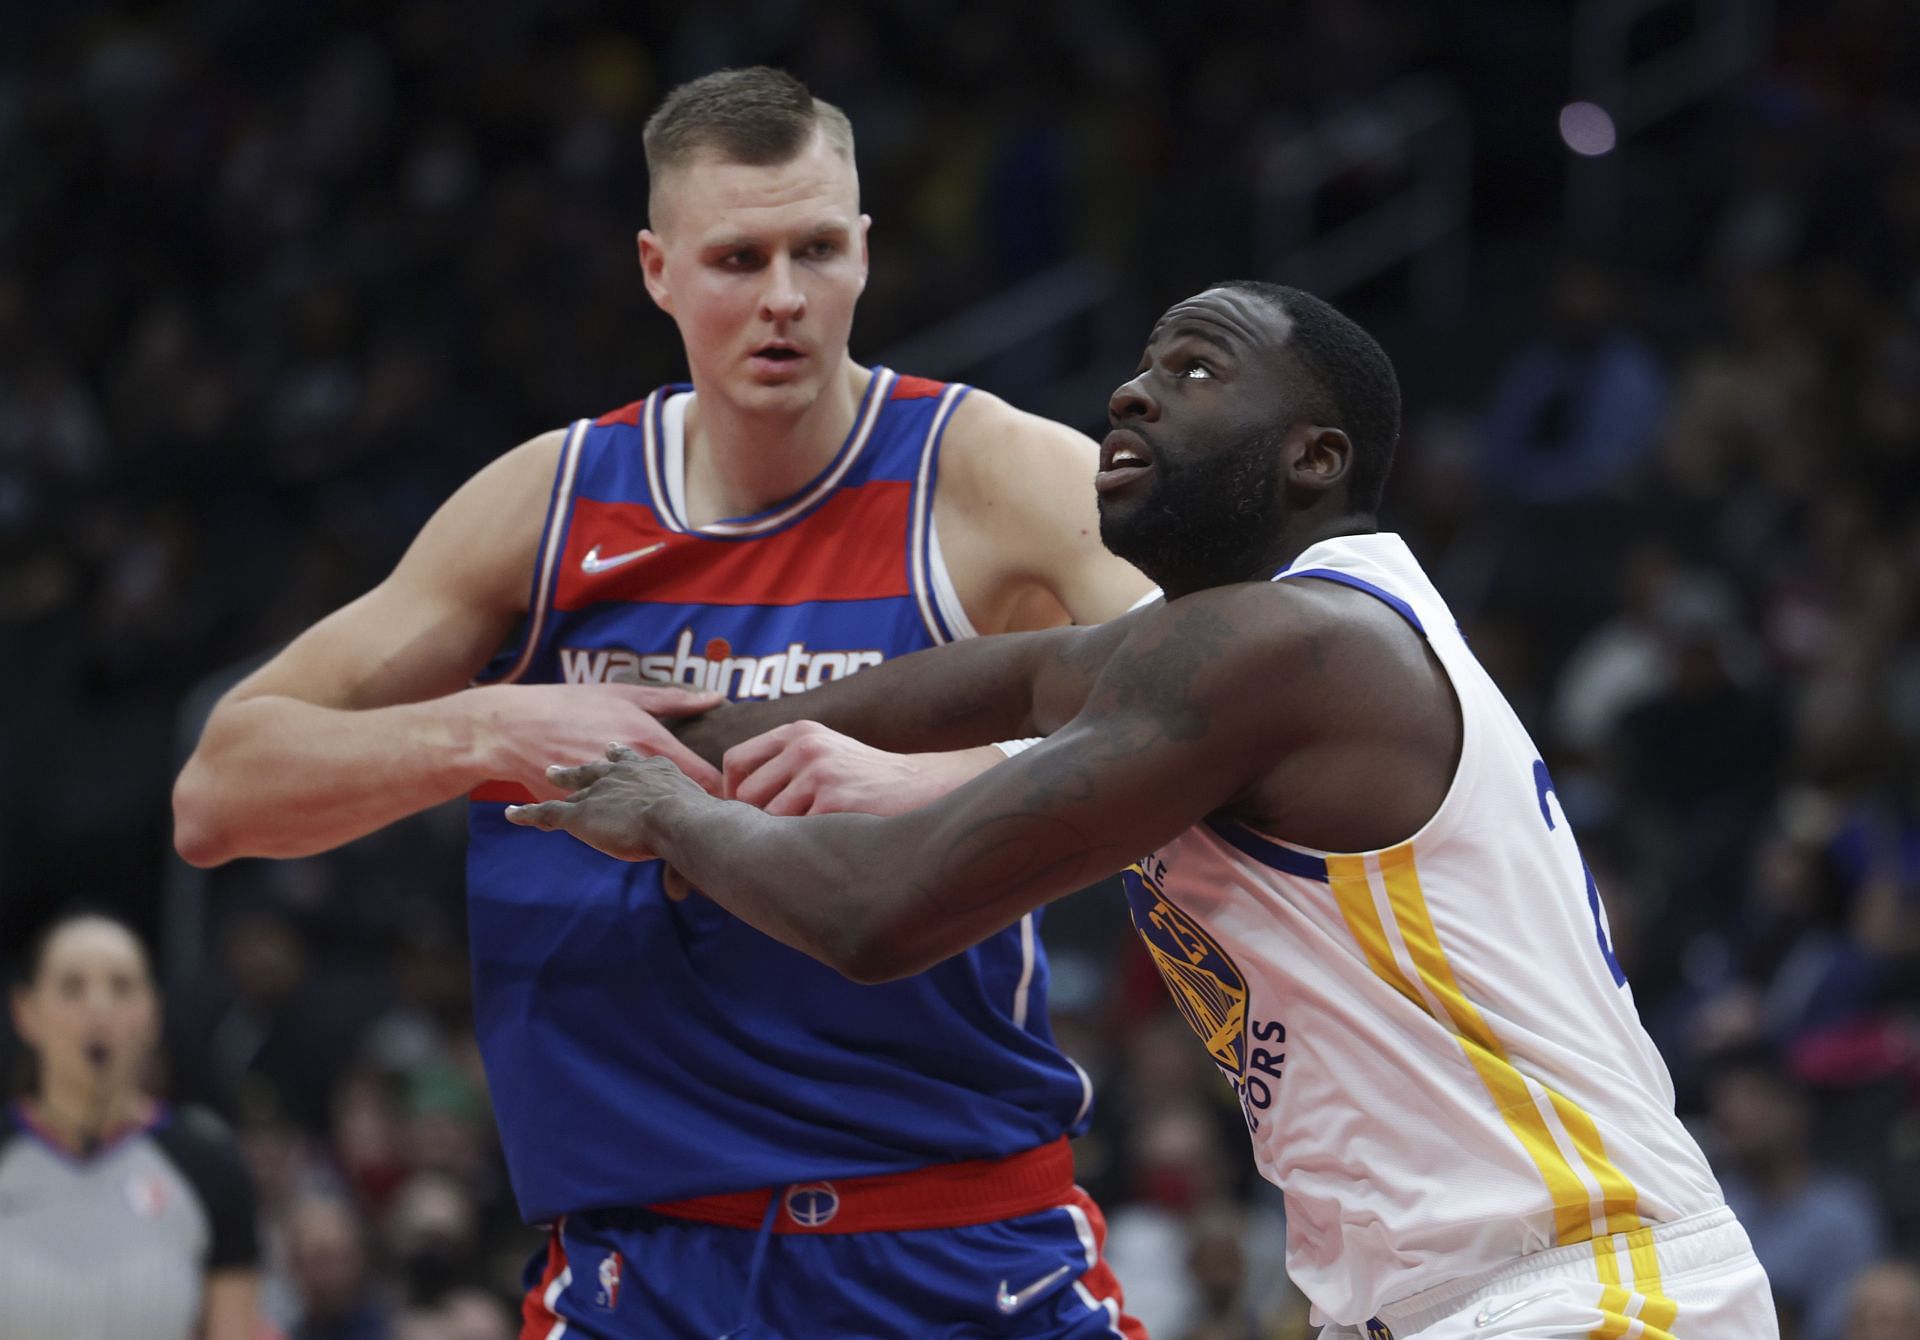 Draymond Green #23 of the Golden State Warriors and Kristaps Porzingis #6 of the Washington Wizards go for a rebound